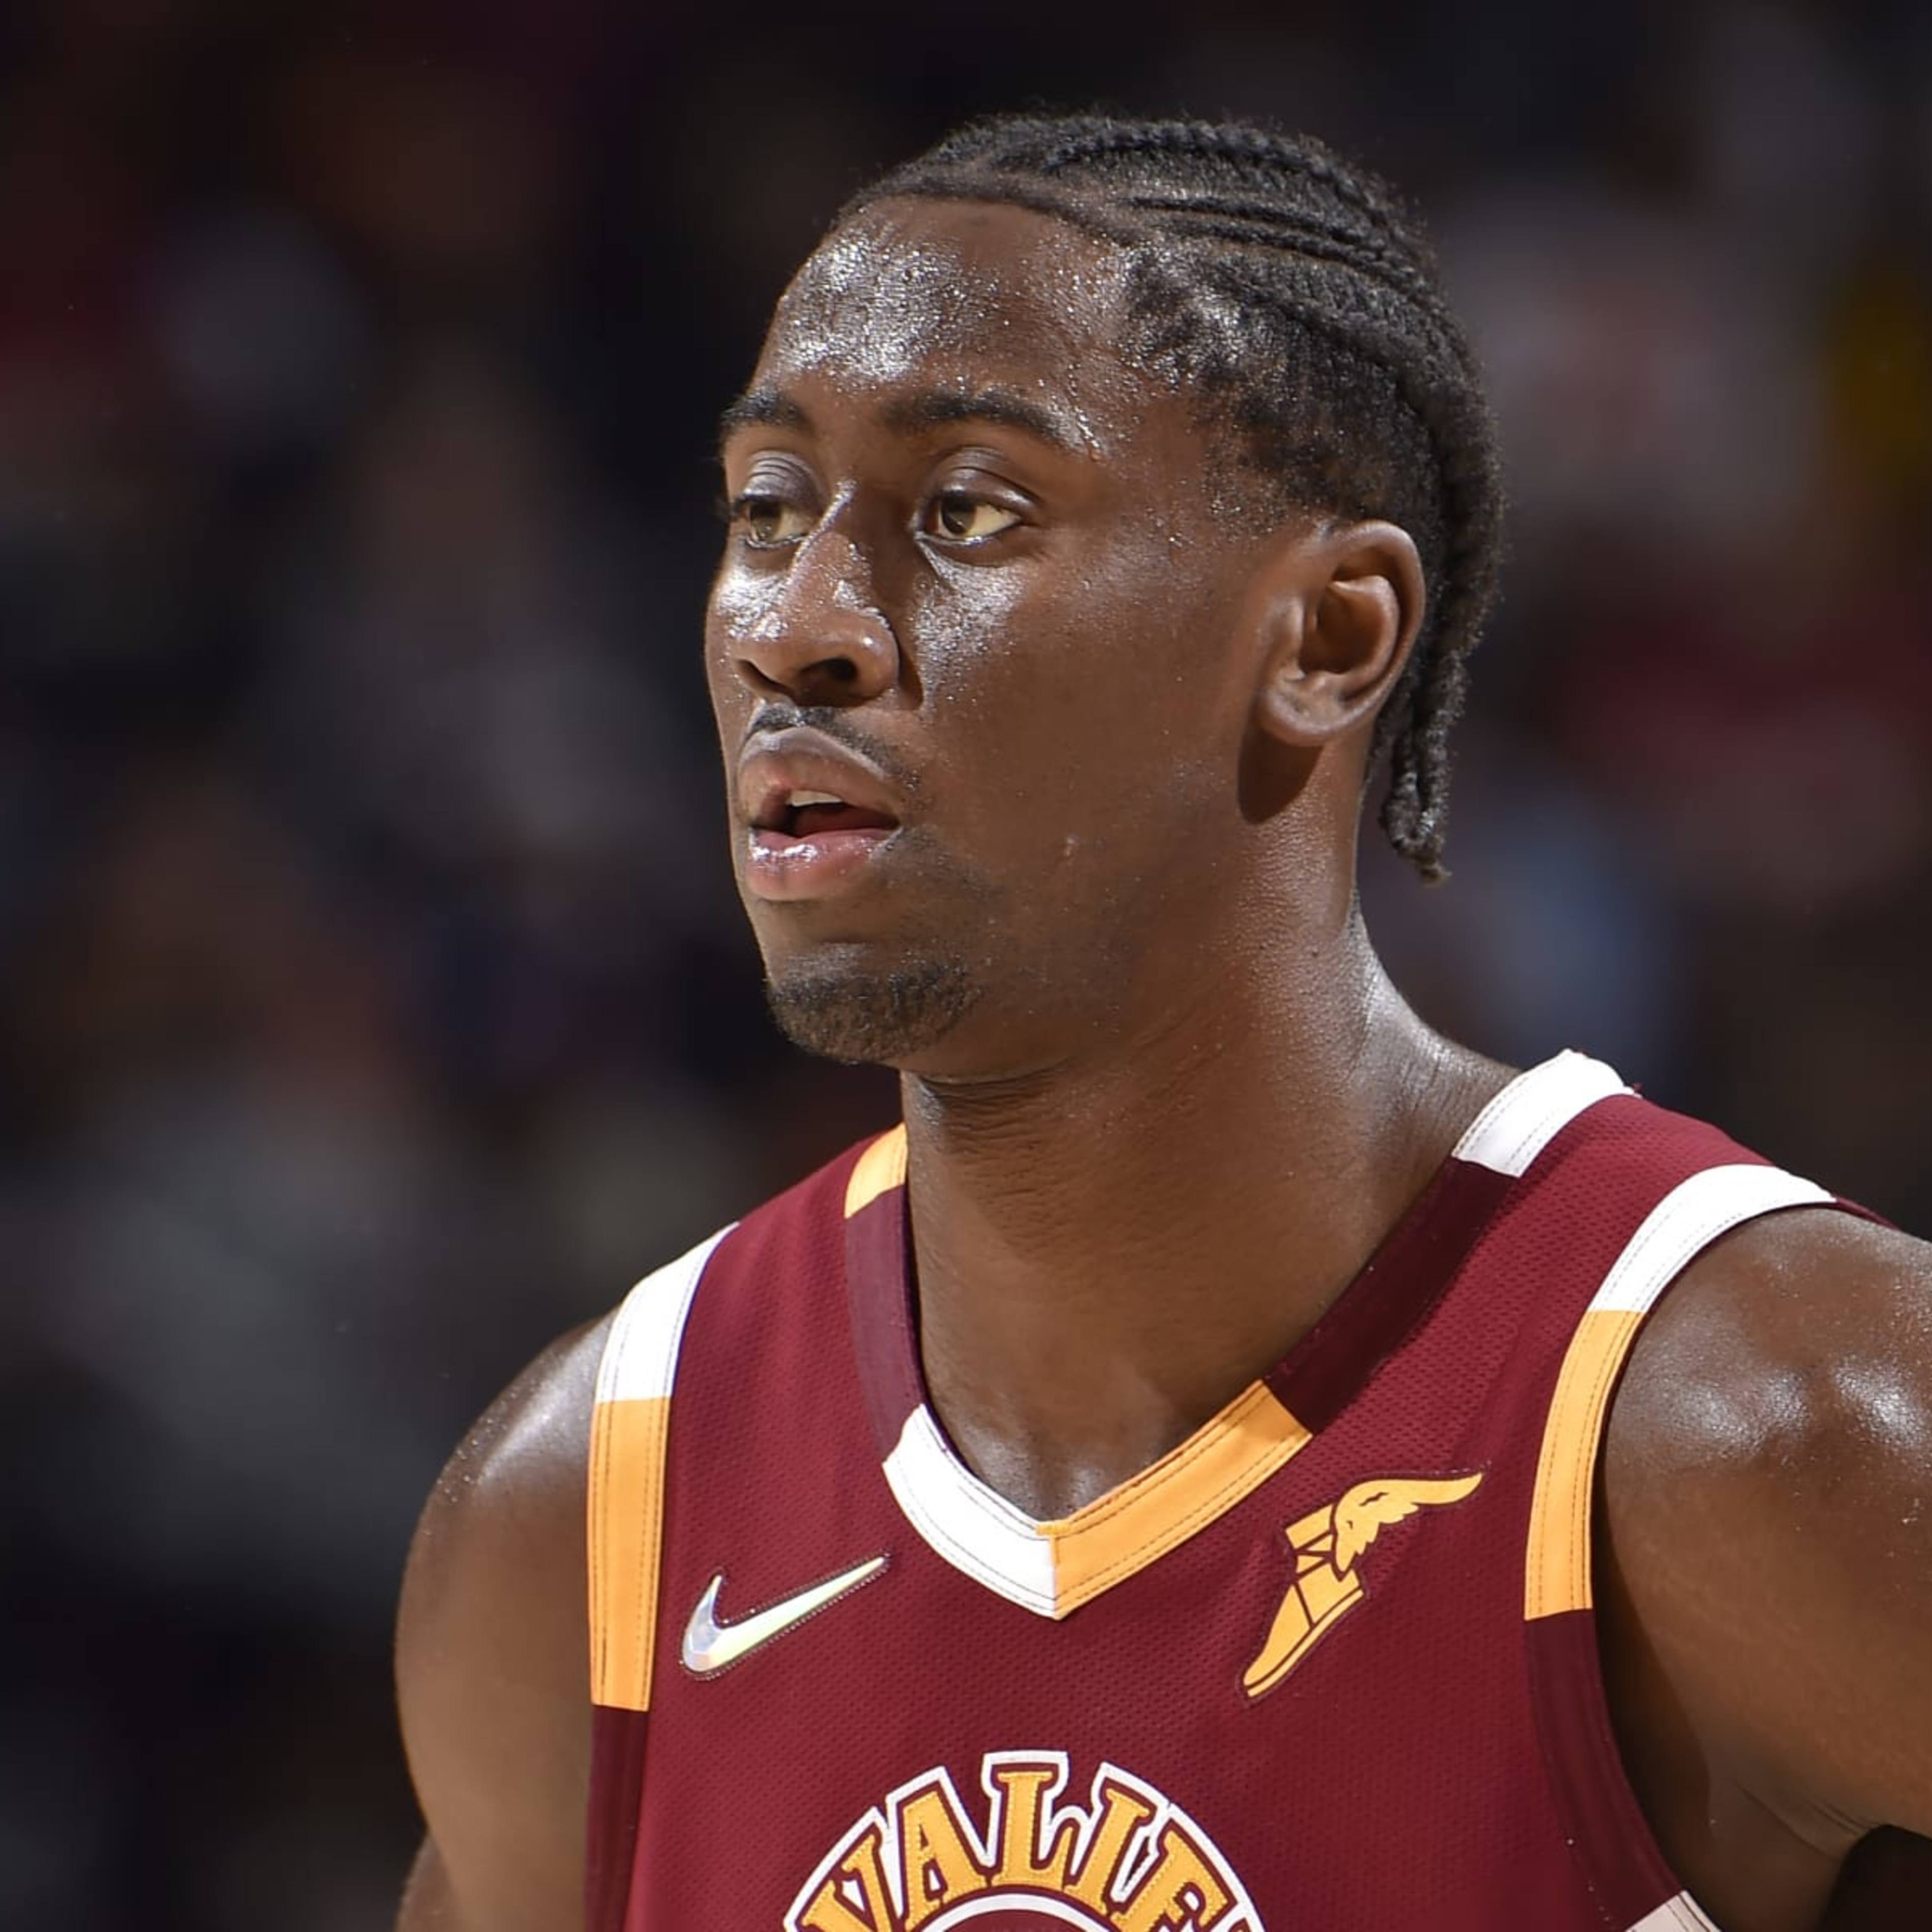 Cavaliers Rumors: Caris LeVert Preferred over Collin Sexton by Multiple People in CLE